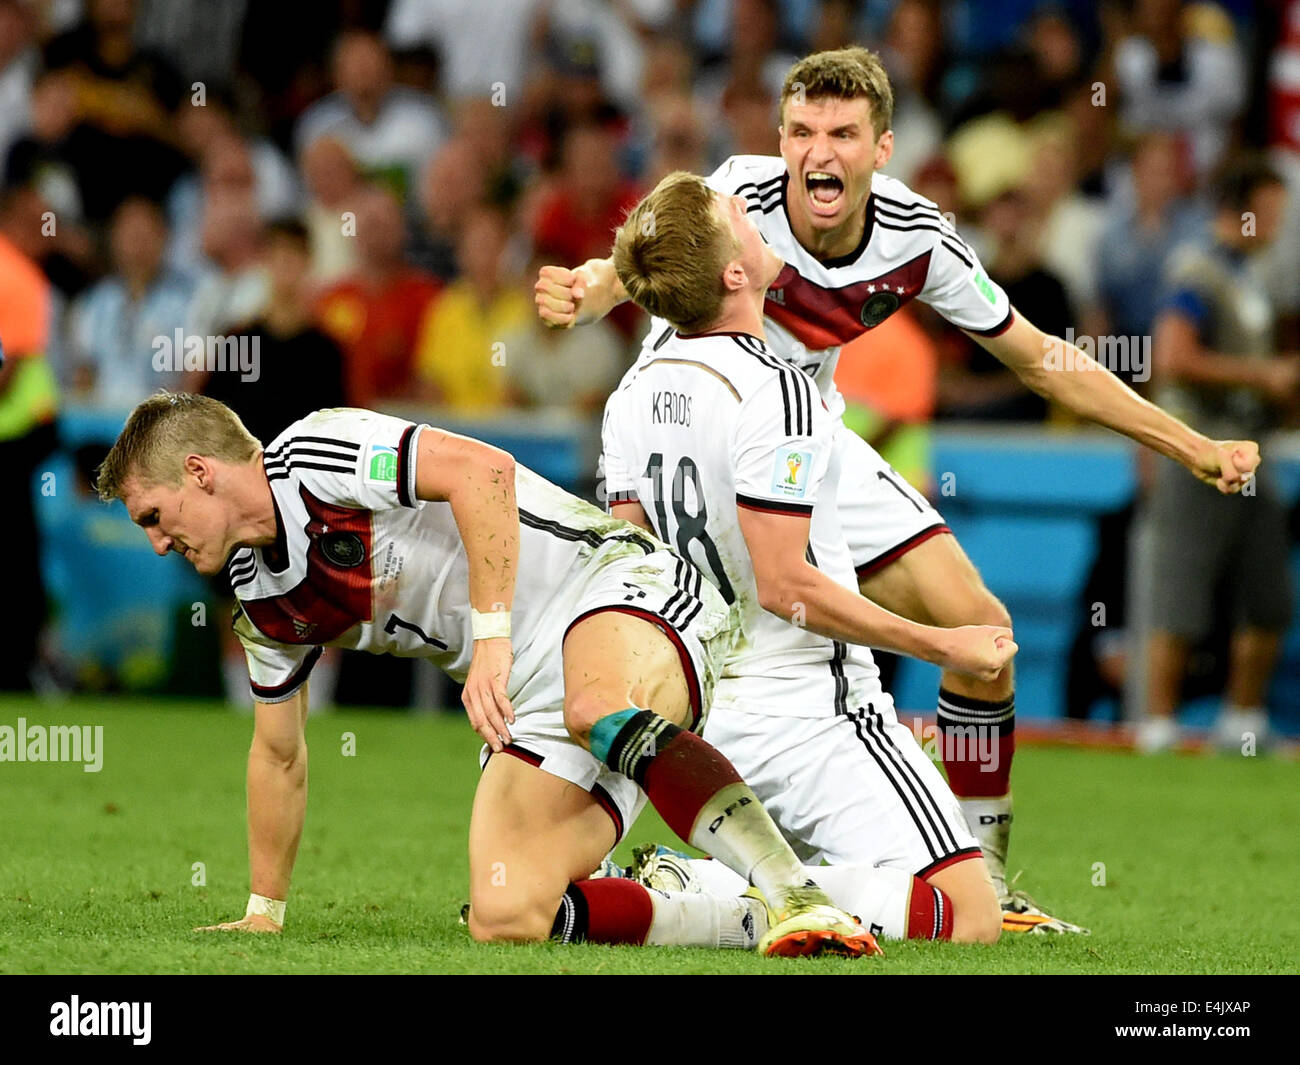 Rio De Janeiro, Brazil. 13th July, 2014. Germany's Thomas Muller, Toni Kroos and Bastian Schweinsteiger (R to L) celebrate their victory after the final match between Germany and Argentina of 2014 FIFA World Cup at the Estadio do Maracana Stadium in Rio de Janeiro, Brazil, on July 13, 2014. Germany won 1-0 over Argentina after 120 minutes and took its fourth World Cup title on Sunday. Credit:  Liu Dawei/Xinhua/Alamy Live News Stock Photo